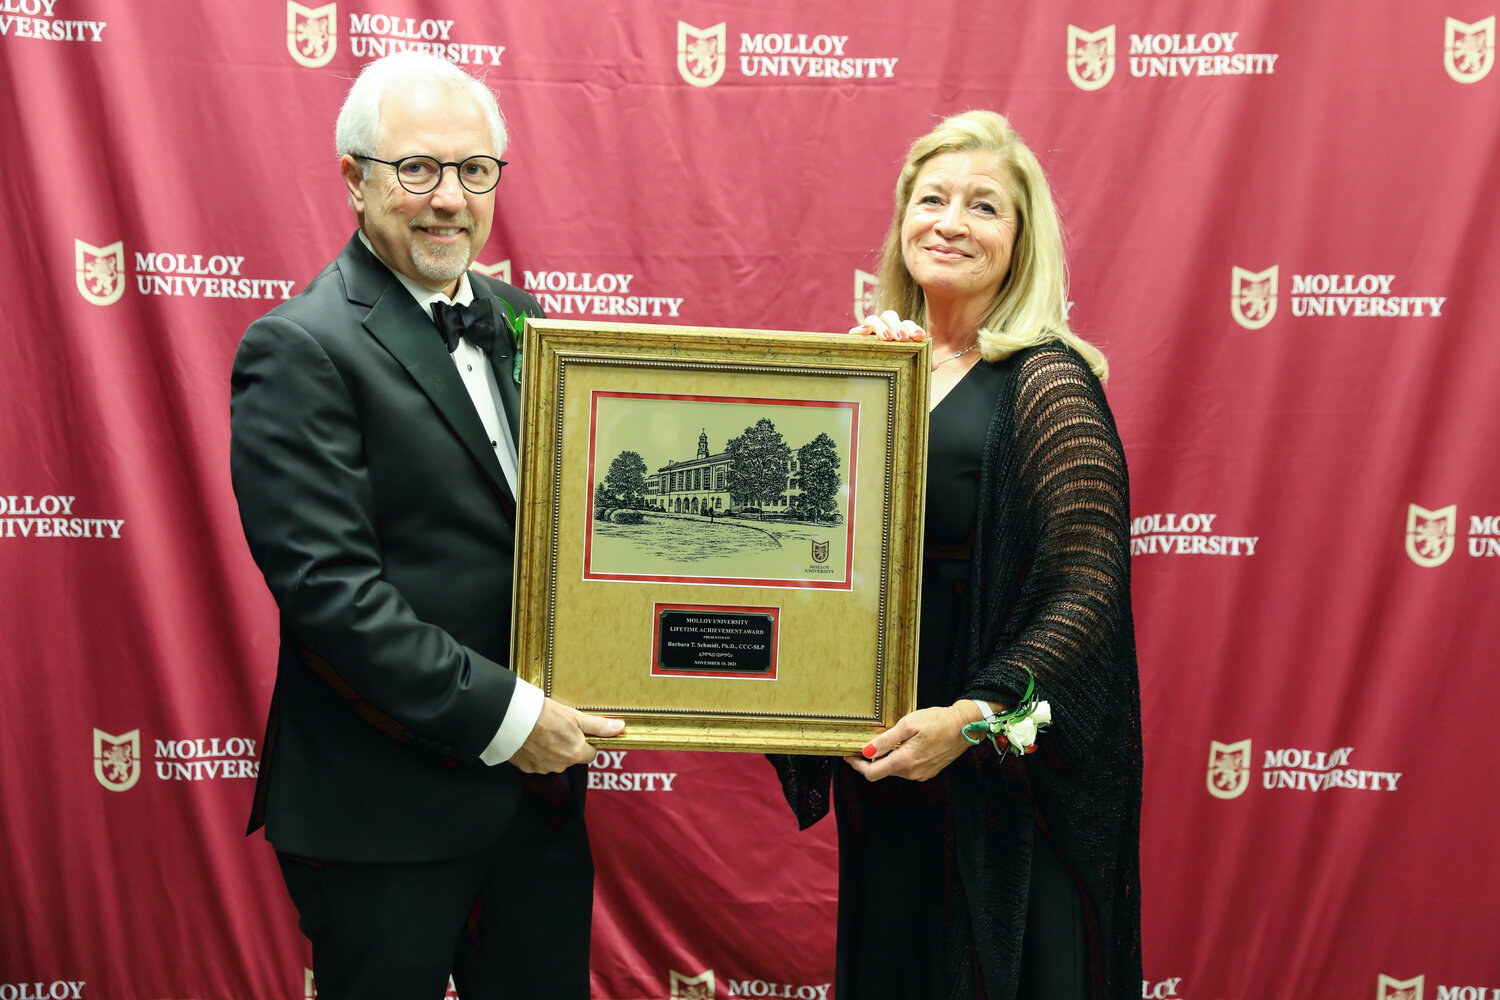 Molloy University President James Lentini, left, presents Gala Honoree Barbara Schmidt of Rockville Centre with the coveted Lifetime Achievement Award for her achievements, leadership and service within the community.